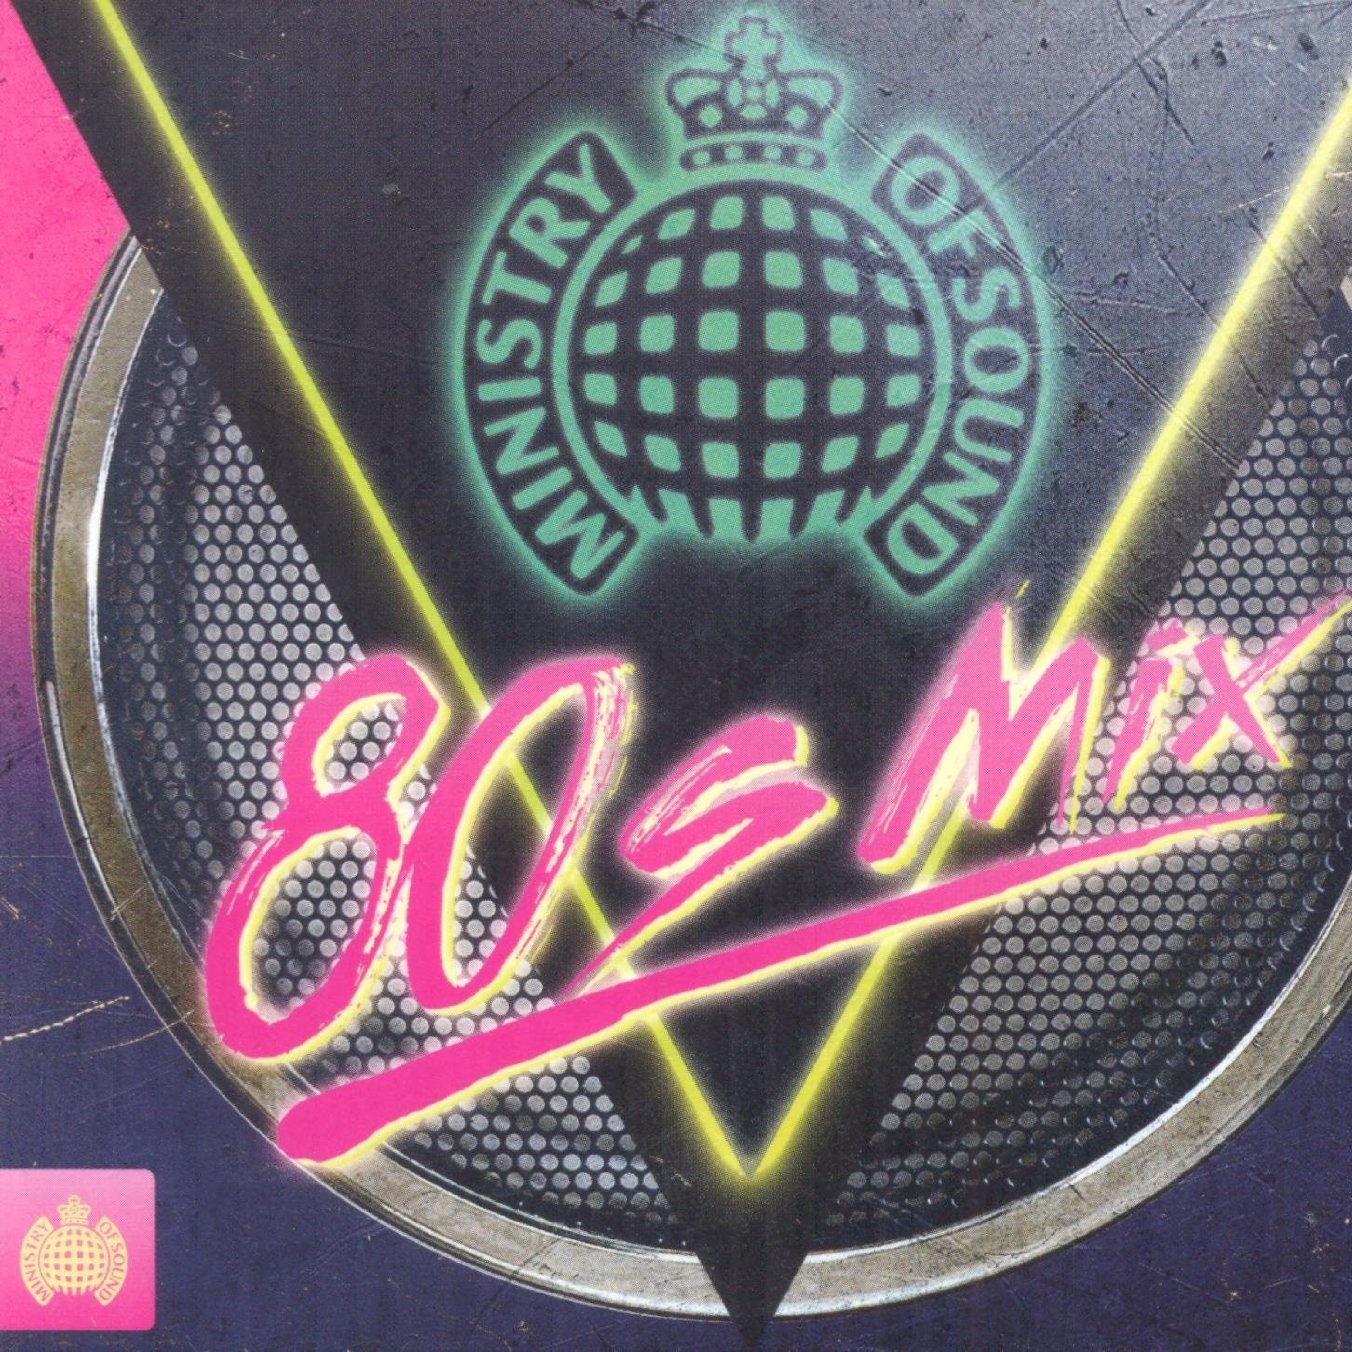 Ministry Of Sound 80s Mix